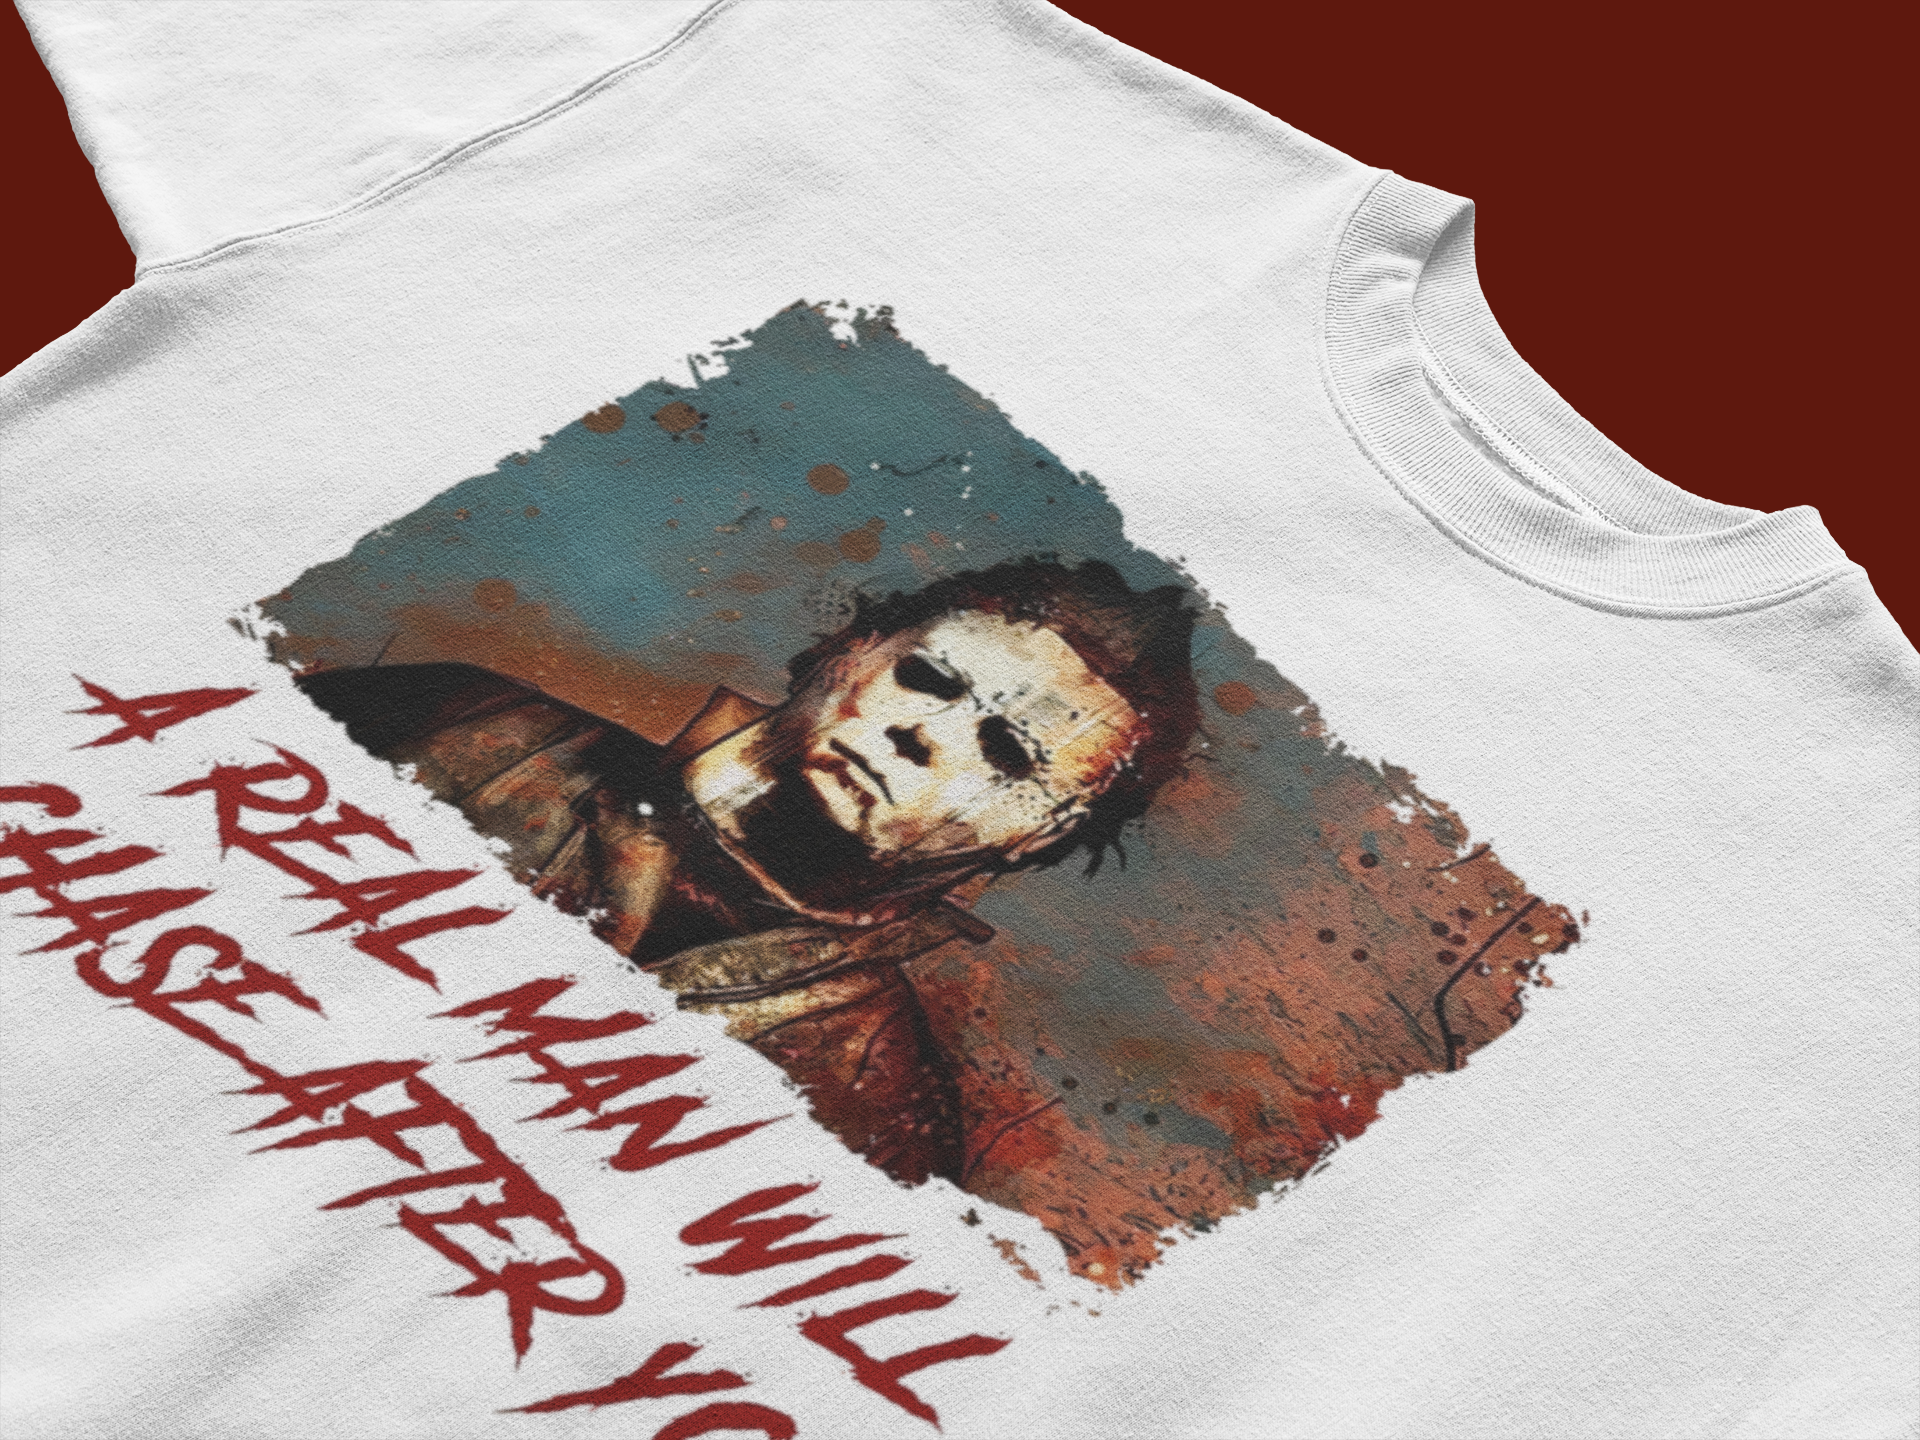 The Real Man Will Chase After You Halloween T-Shirt Looper Tees